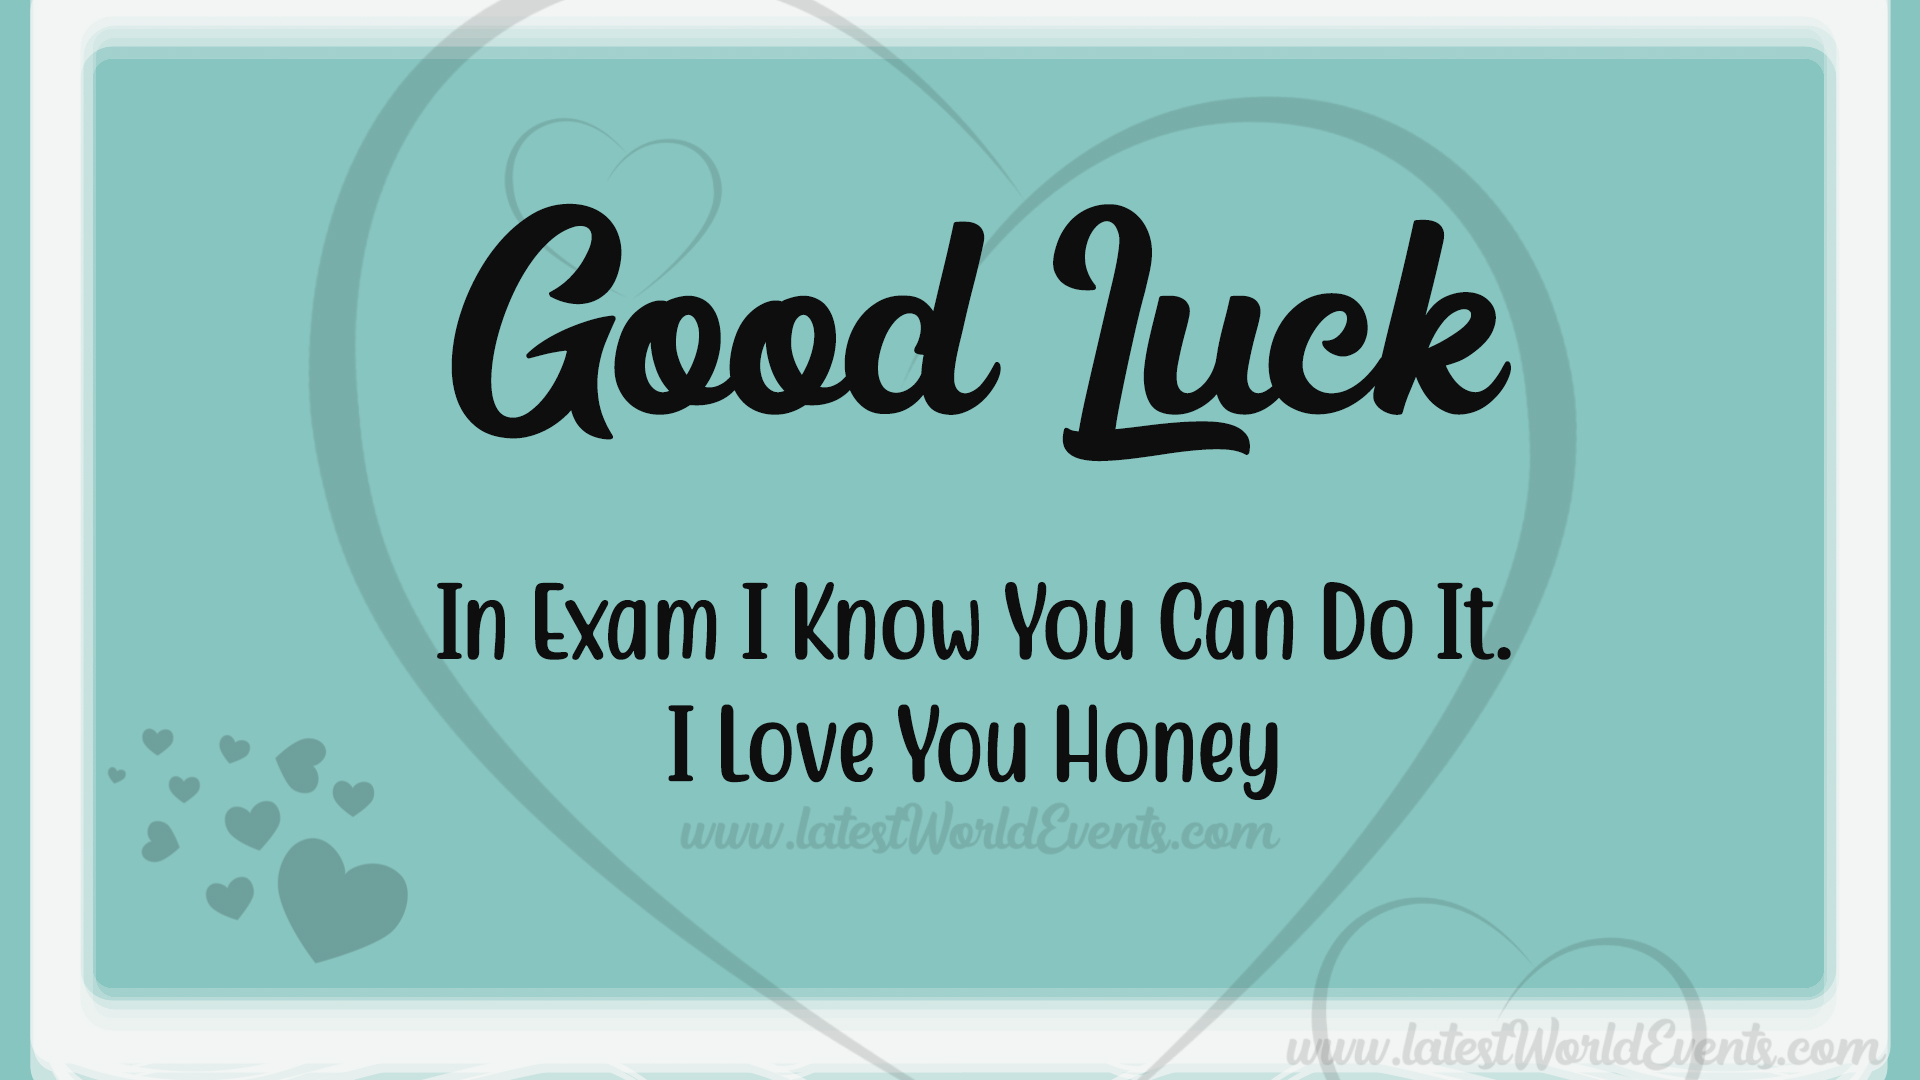 romntic-good-luck-wishes-quotes